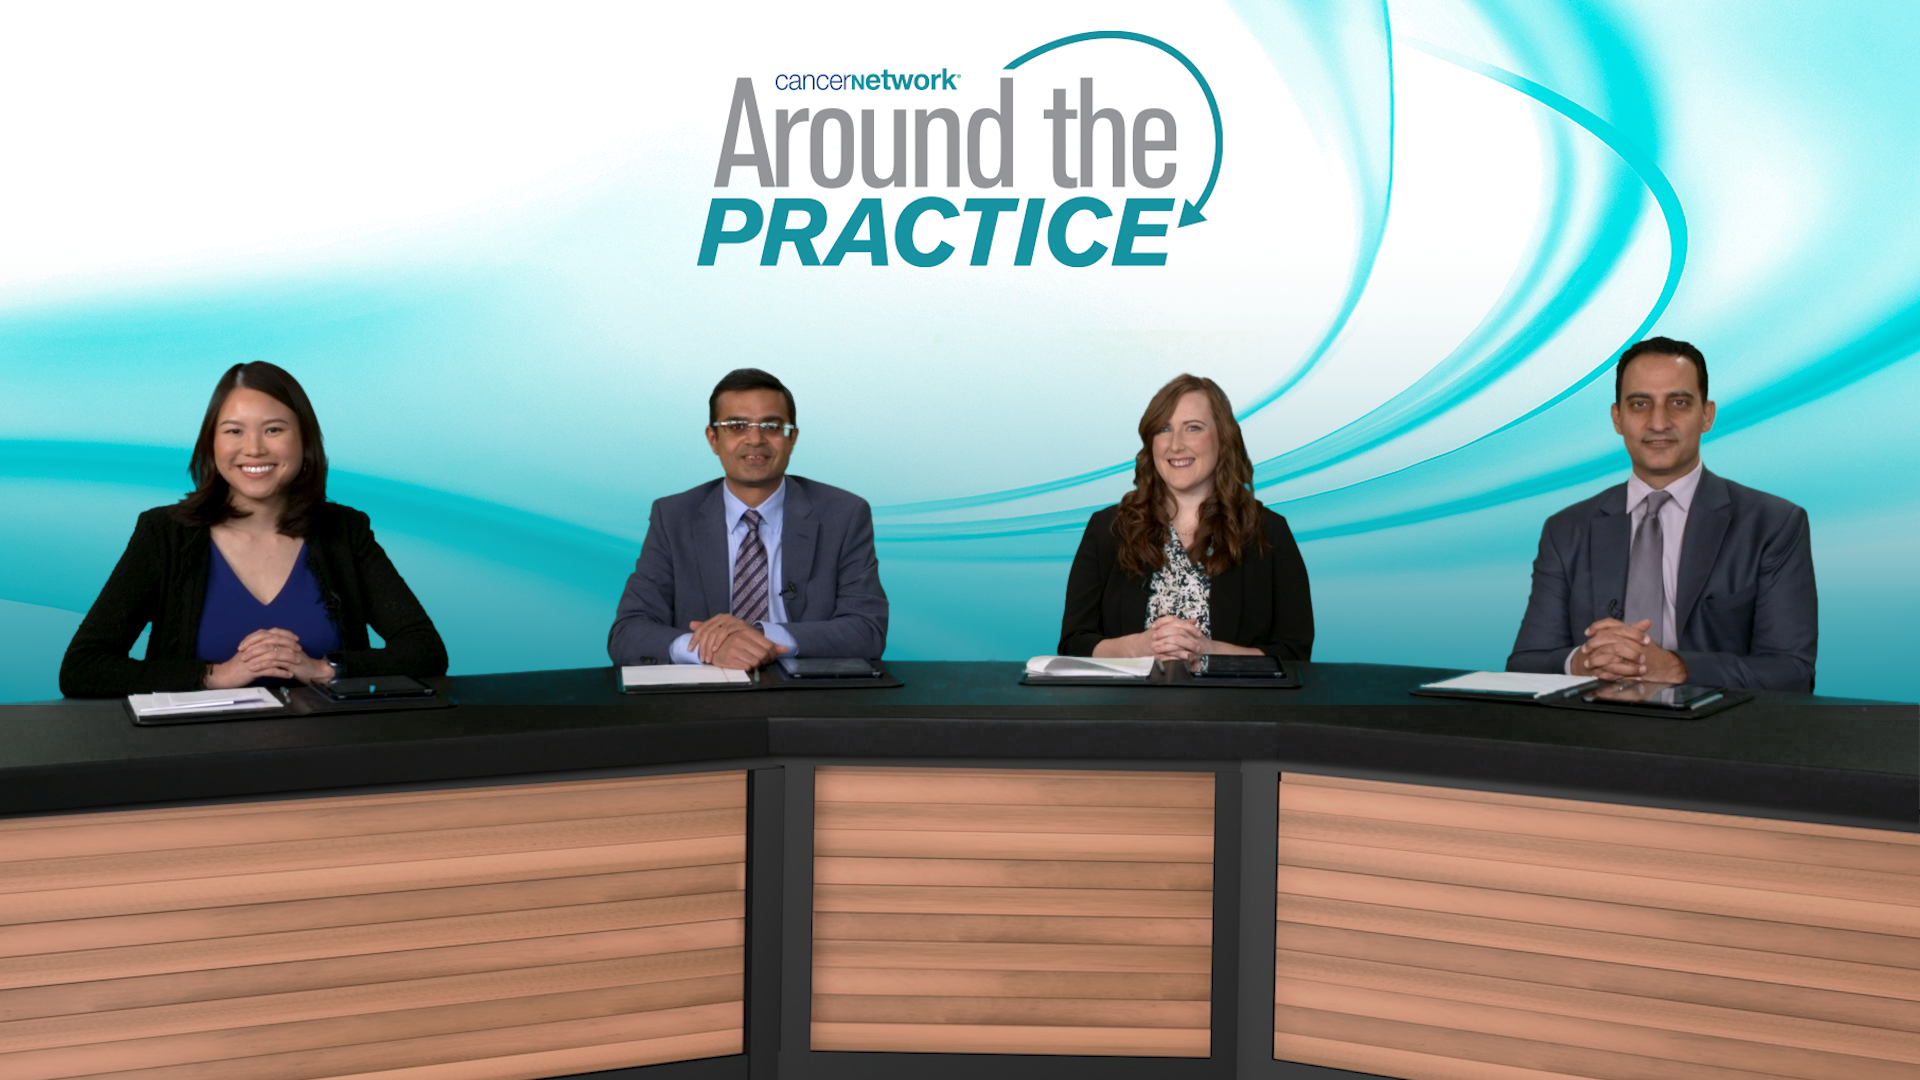 Updates on Combination Treatment Approaches with BTKi + Venetoclax